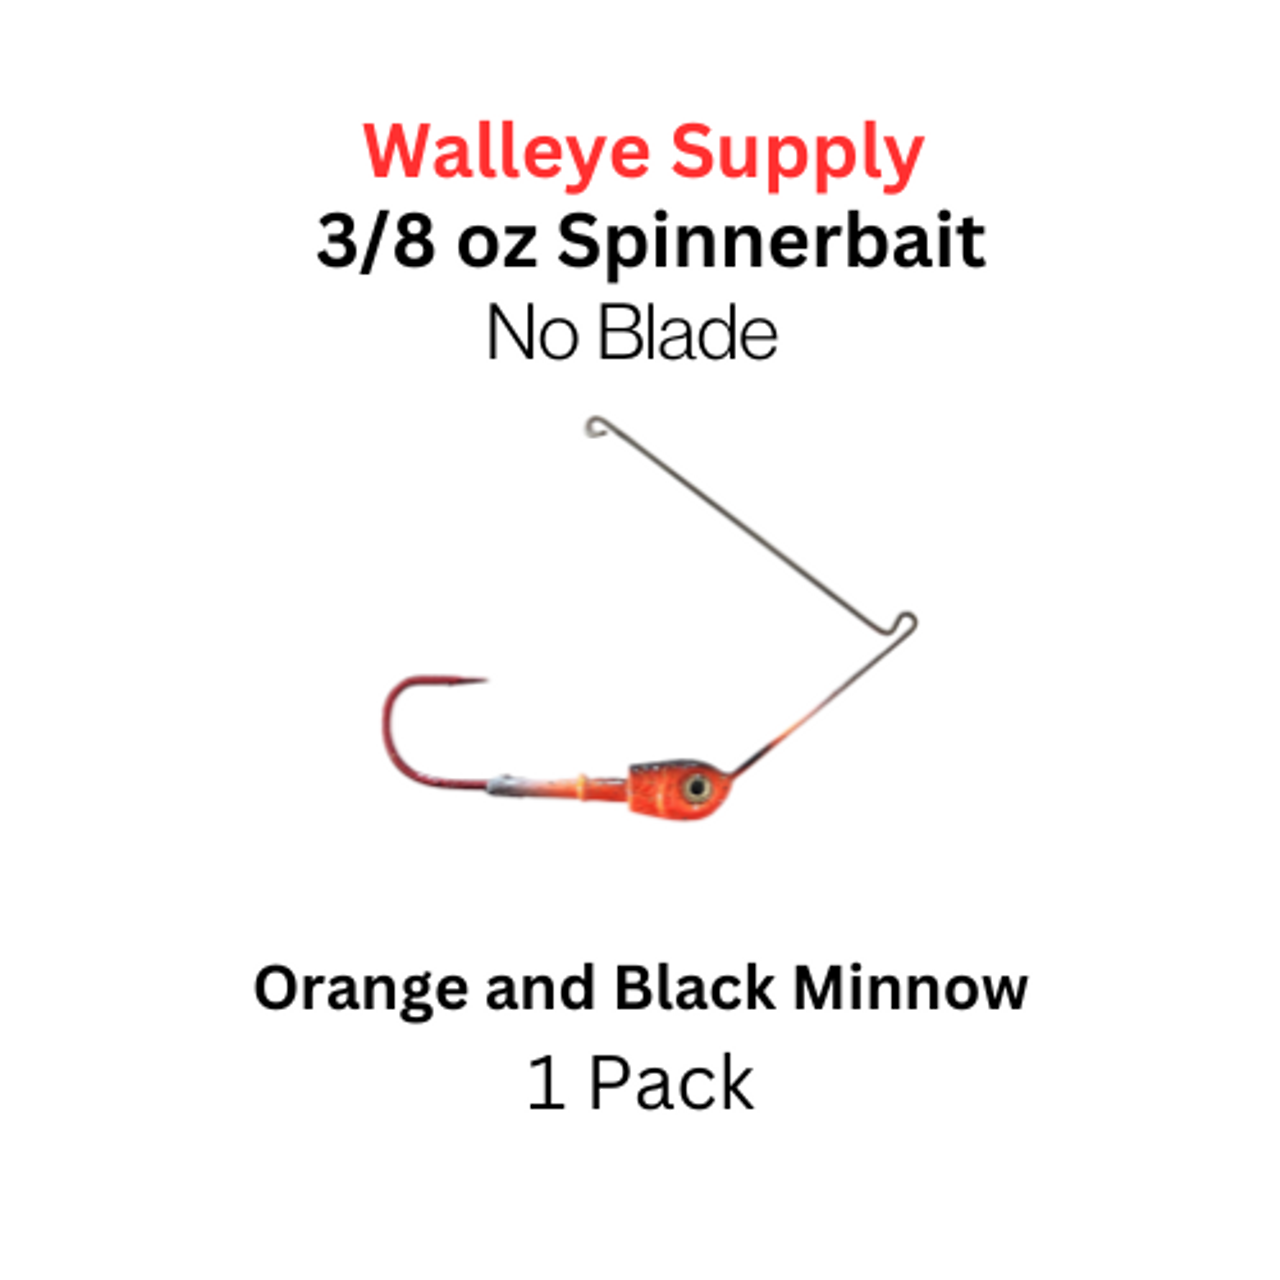 https://cdn11.bigcommerce.com/s-u9nbd/images/stencil/1280x1280/products/6795/17119/38_oz_Walleyesupply_Spinner_blades_orange_and_black_minnow___03214.1708890940.png?c=2